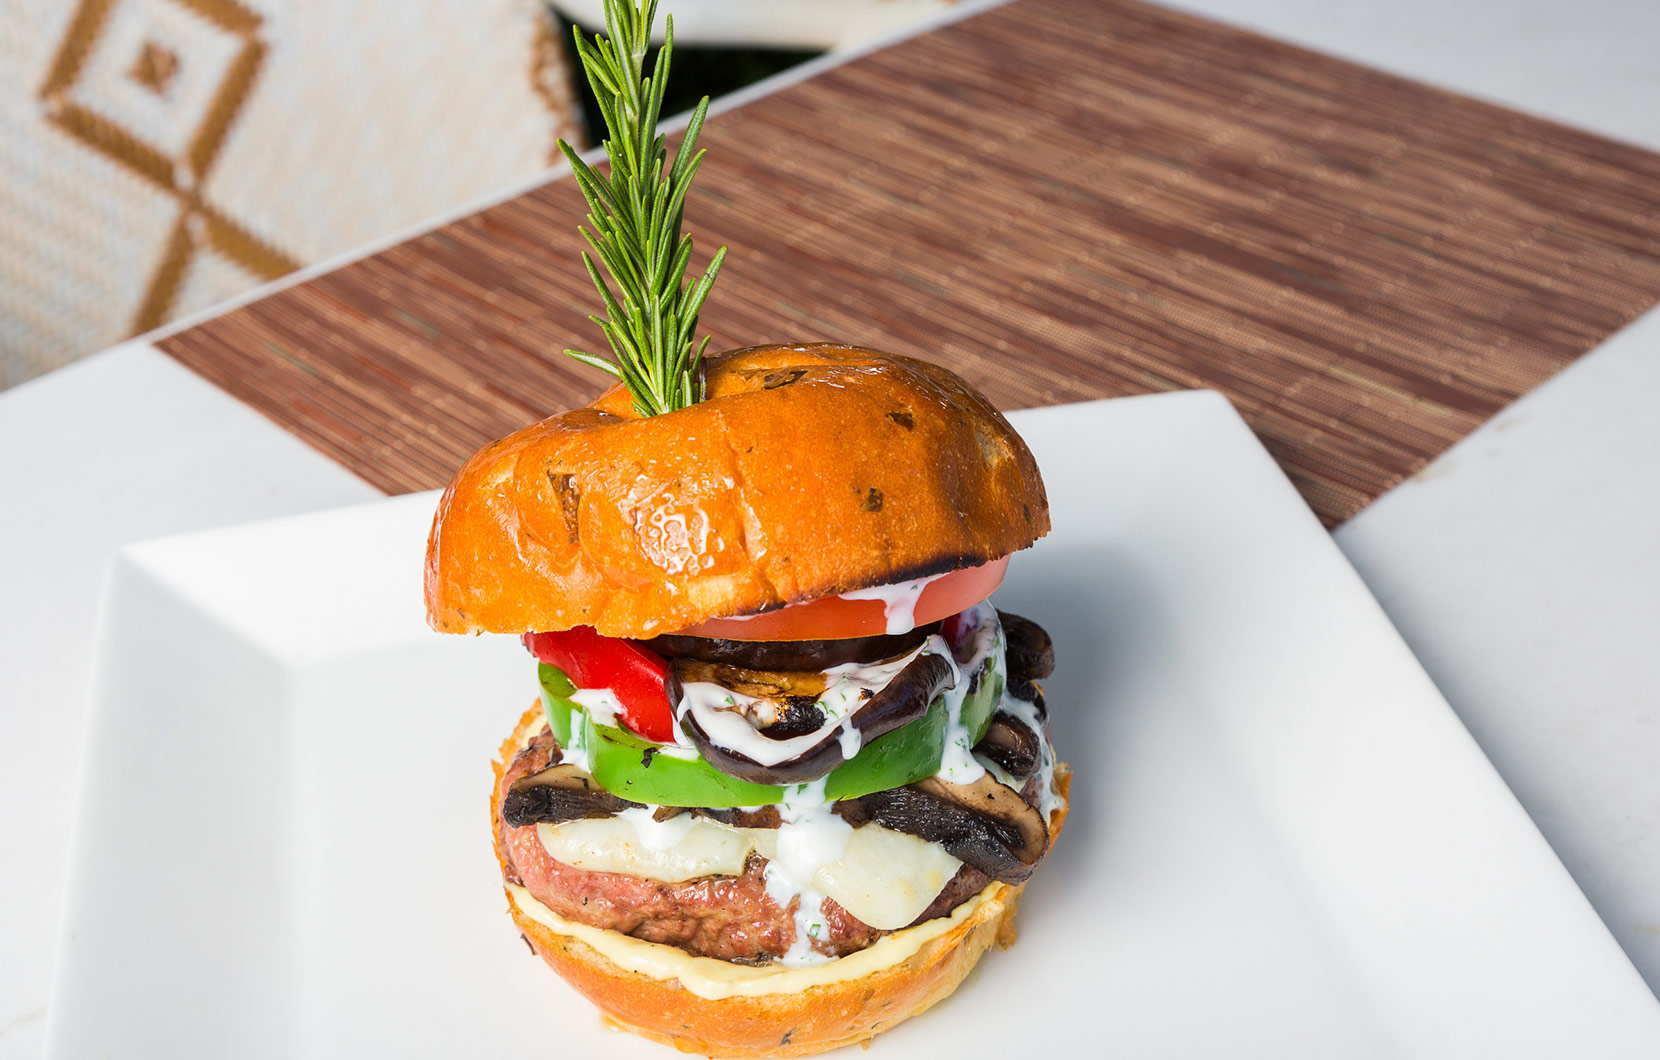 This robust lamb burger by Chef Raúl puts a Mediterranean spin on the mainstay.